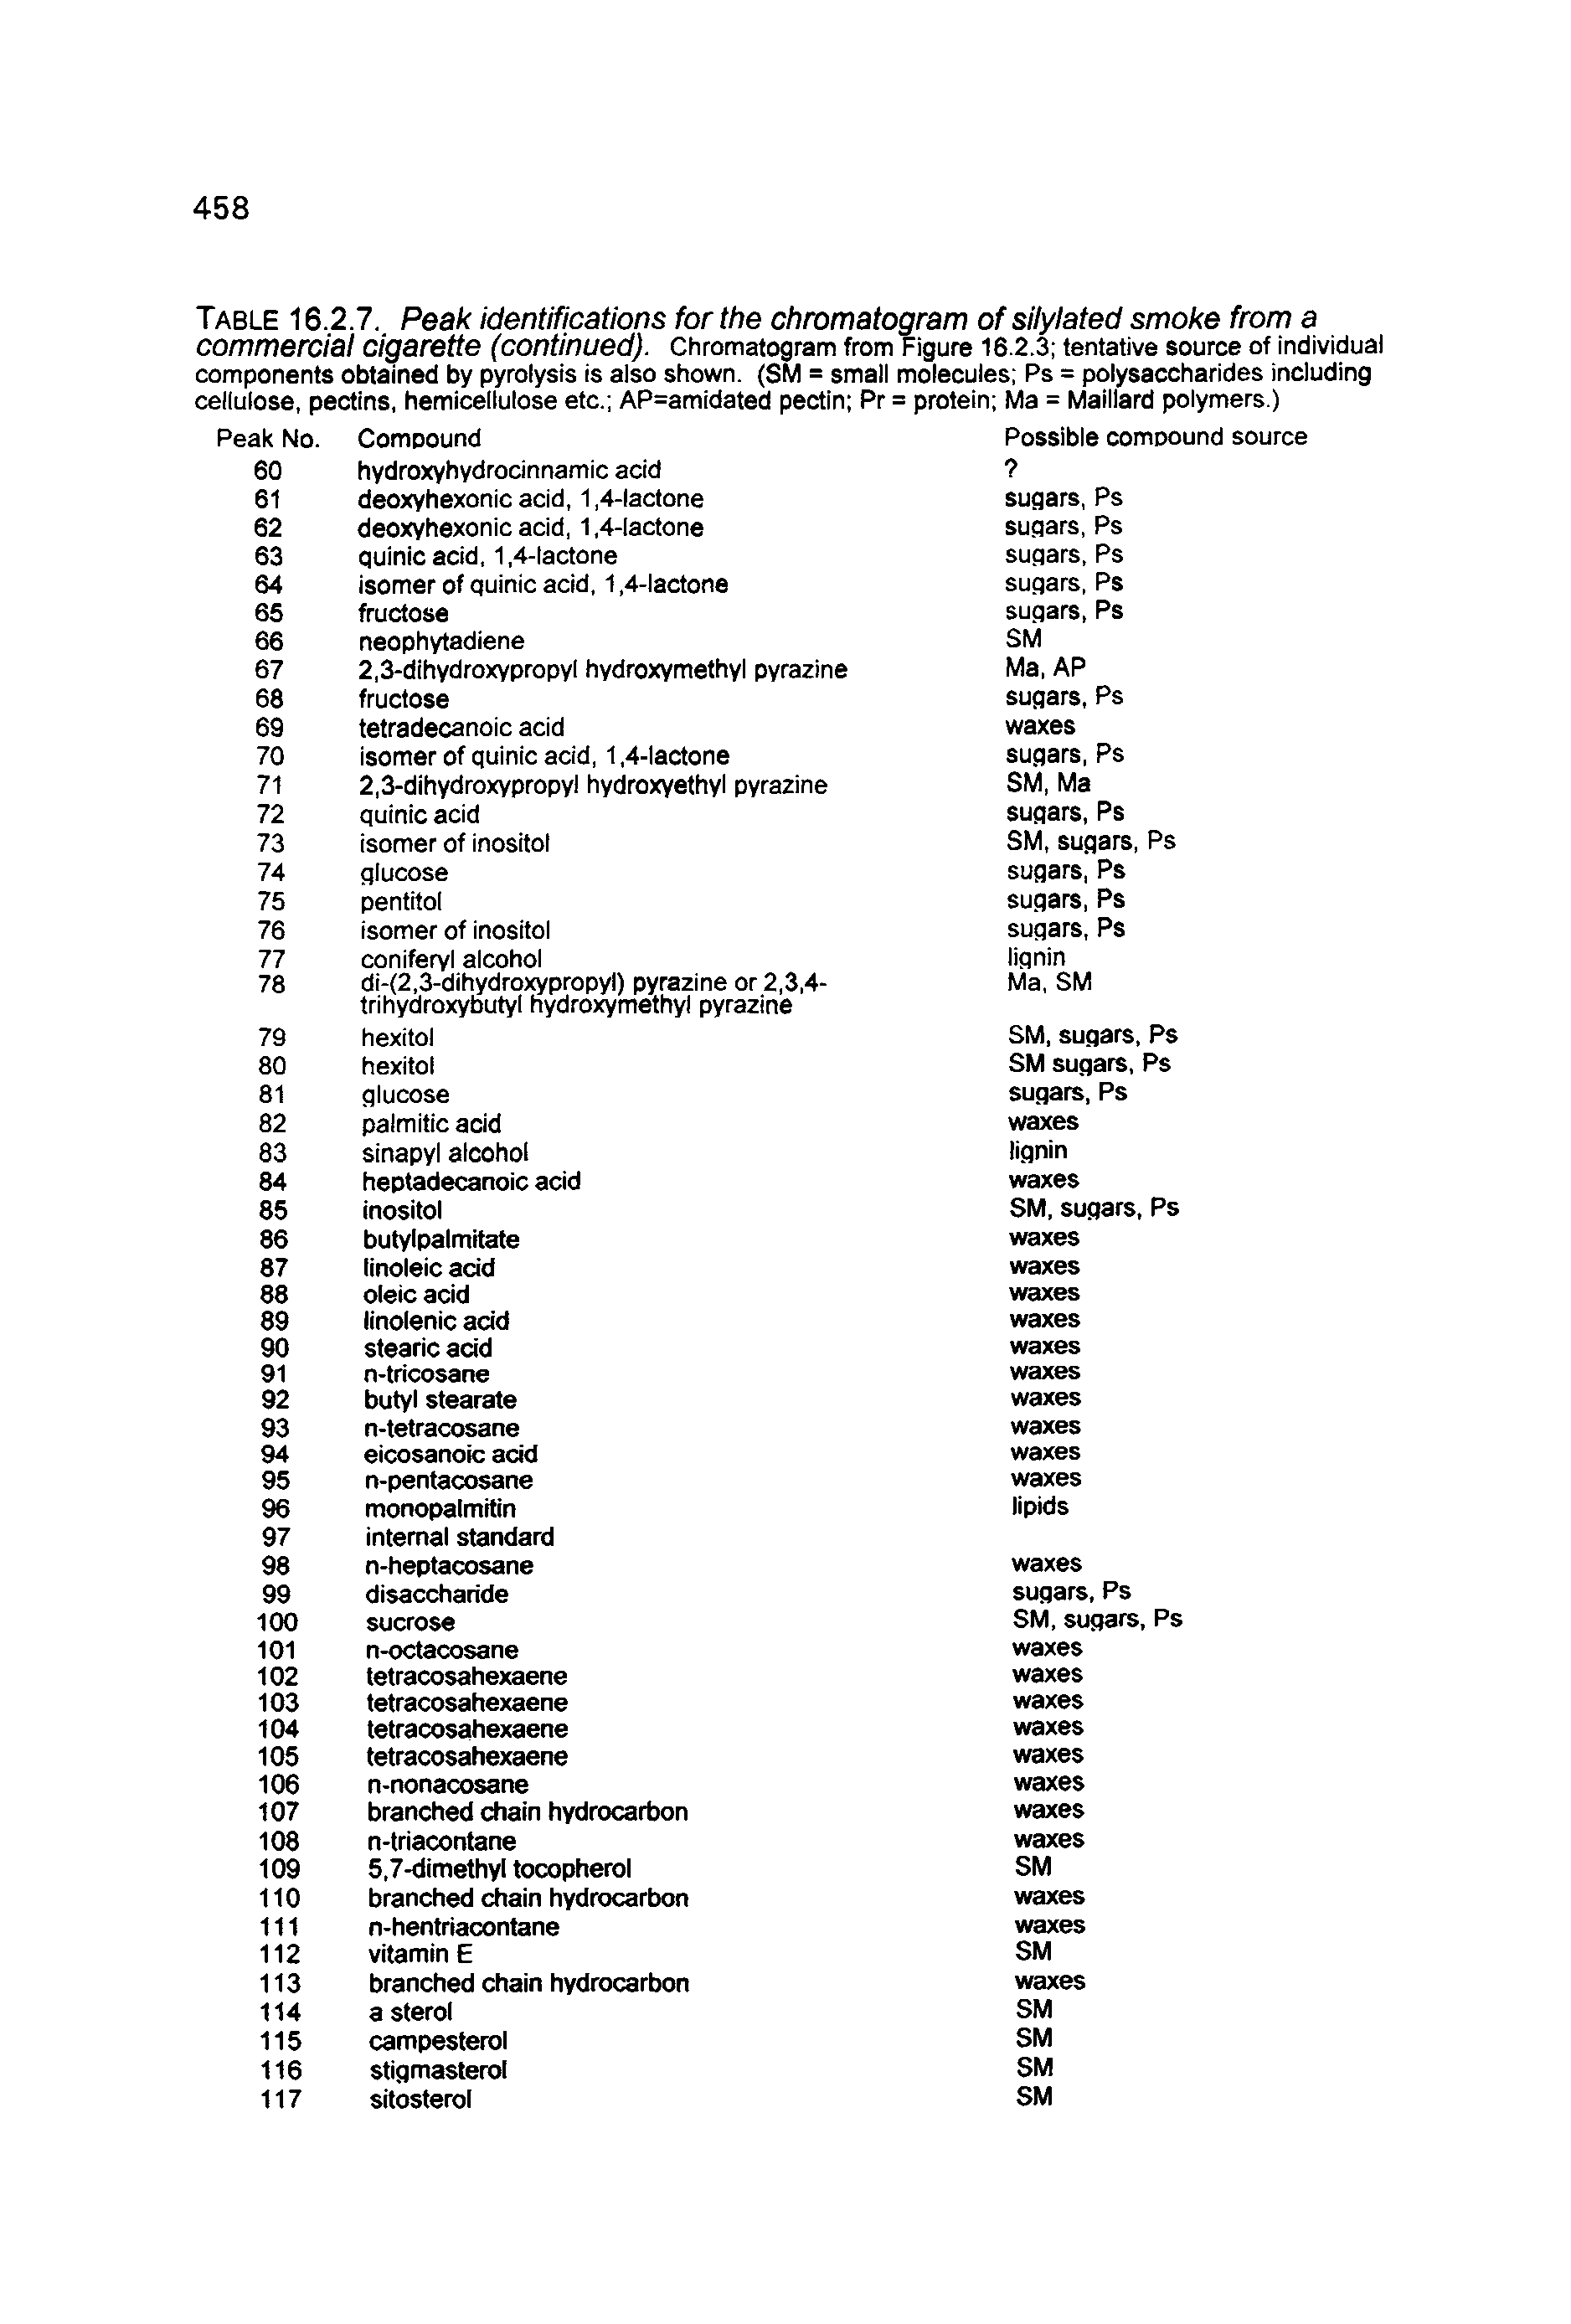 Table 16.2.7. Peak identifications for the chromatogram of silylated smoke from a commercial cigarette (continued). Chromatogram from Figure 16.2.3 tentative source of individual components obtained by pyrolysis is also shown. (SM = small molecules Ps = polysaccharides including cellulose, pectins, hemicellulose etc. AP=amidated pectin Pr = protein Ma = Maillard polymers.)...